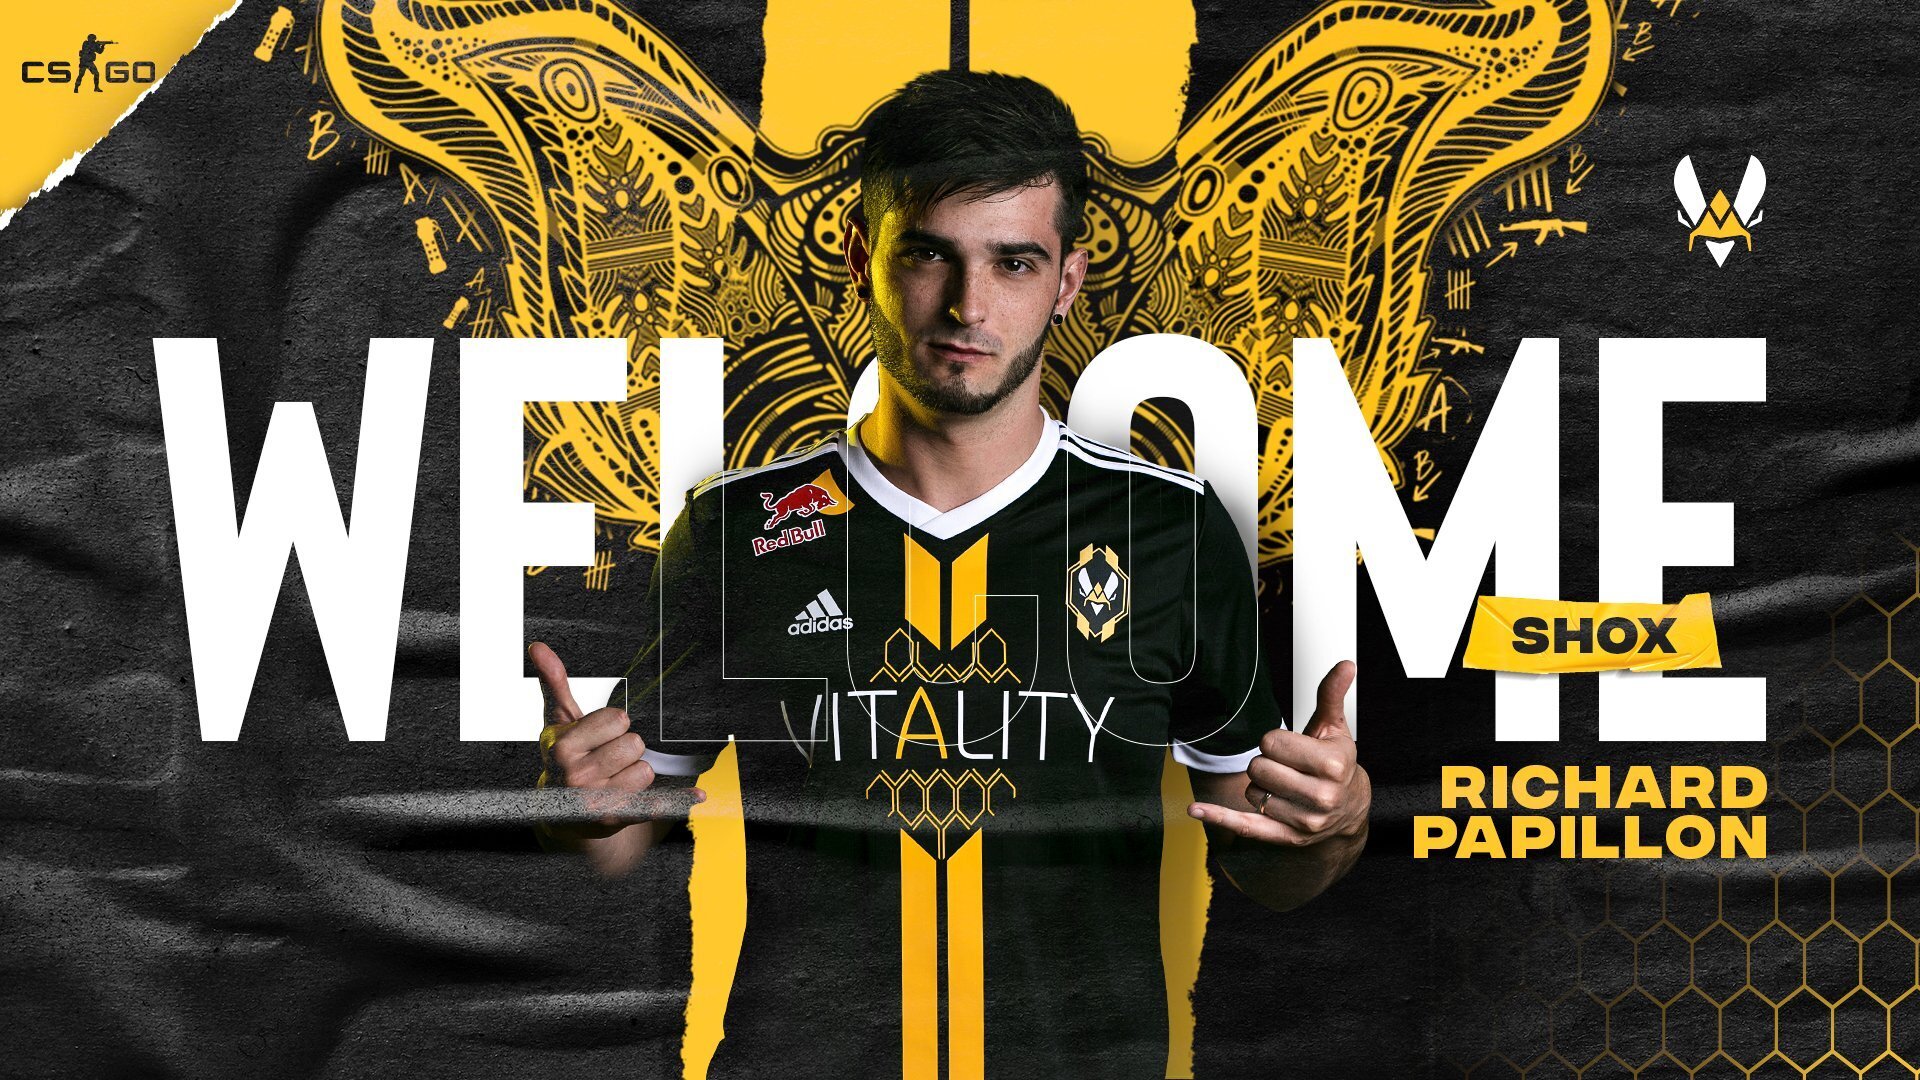 shox is headed to Team Vitality, ending the speculation about where the Frenchman would land (Photo via Team Vitality)